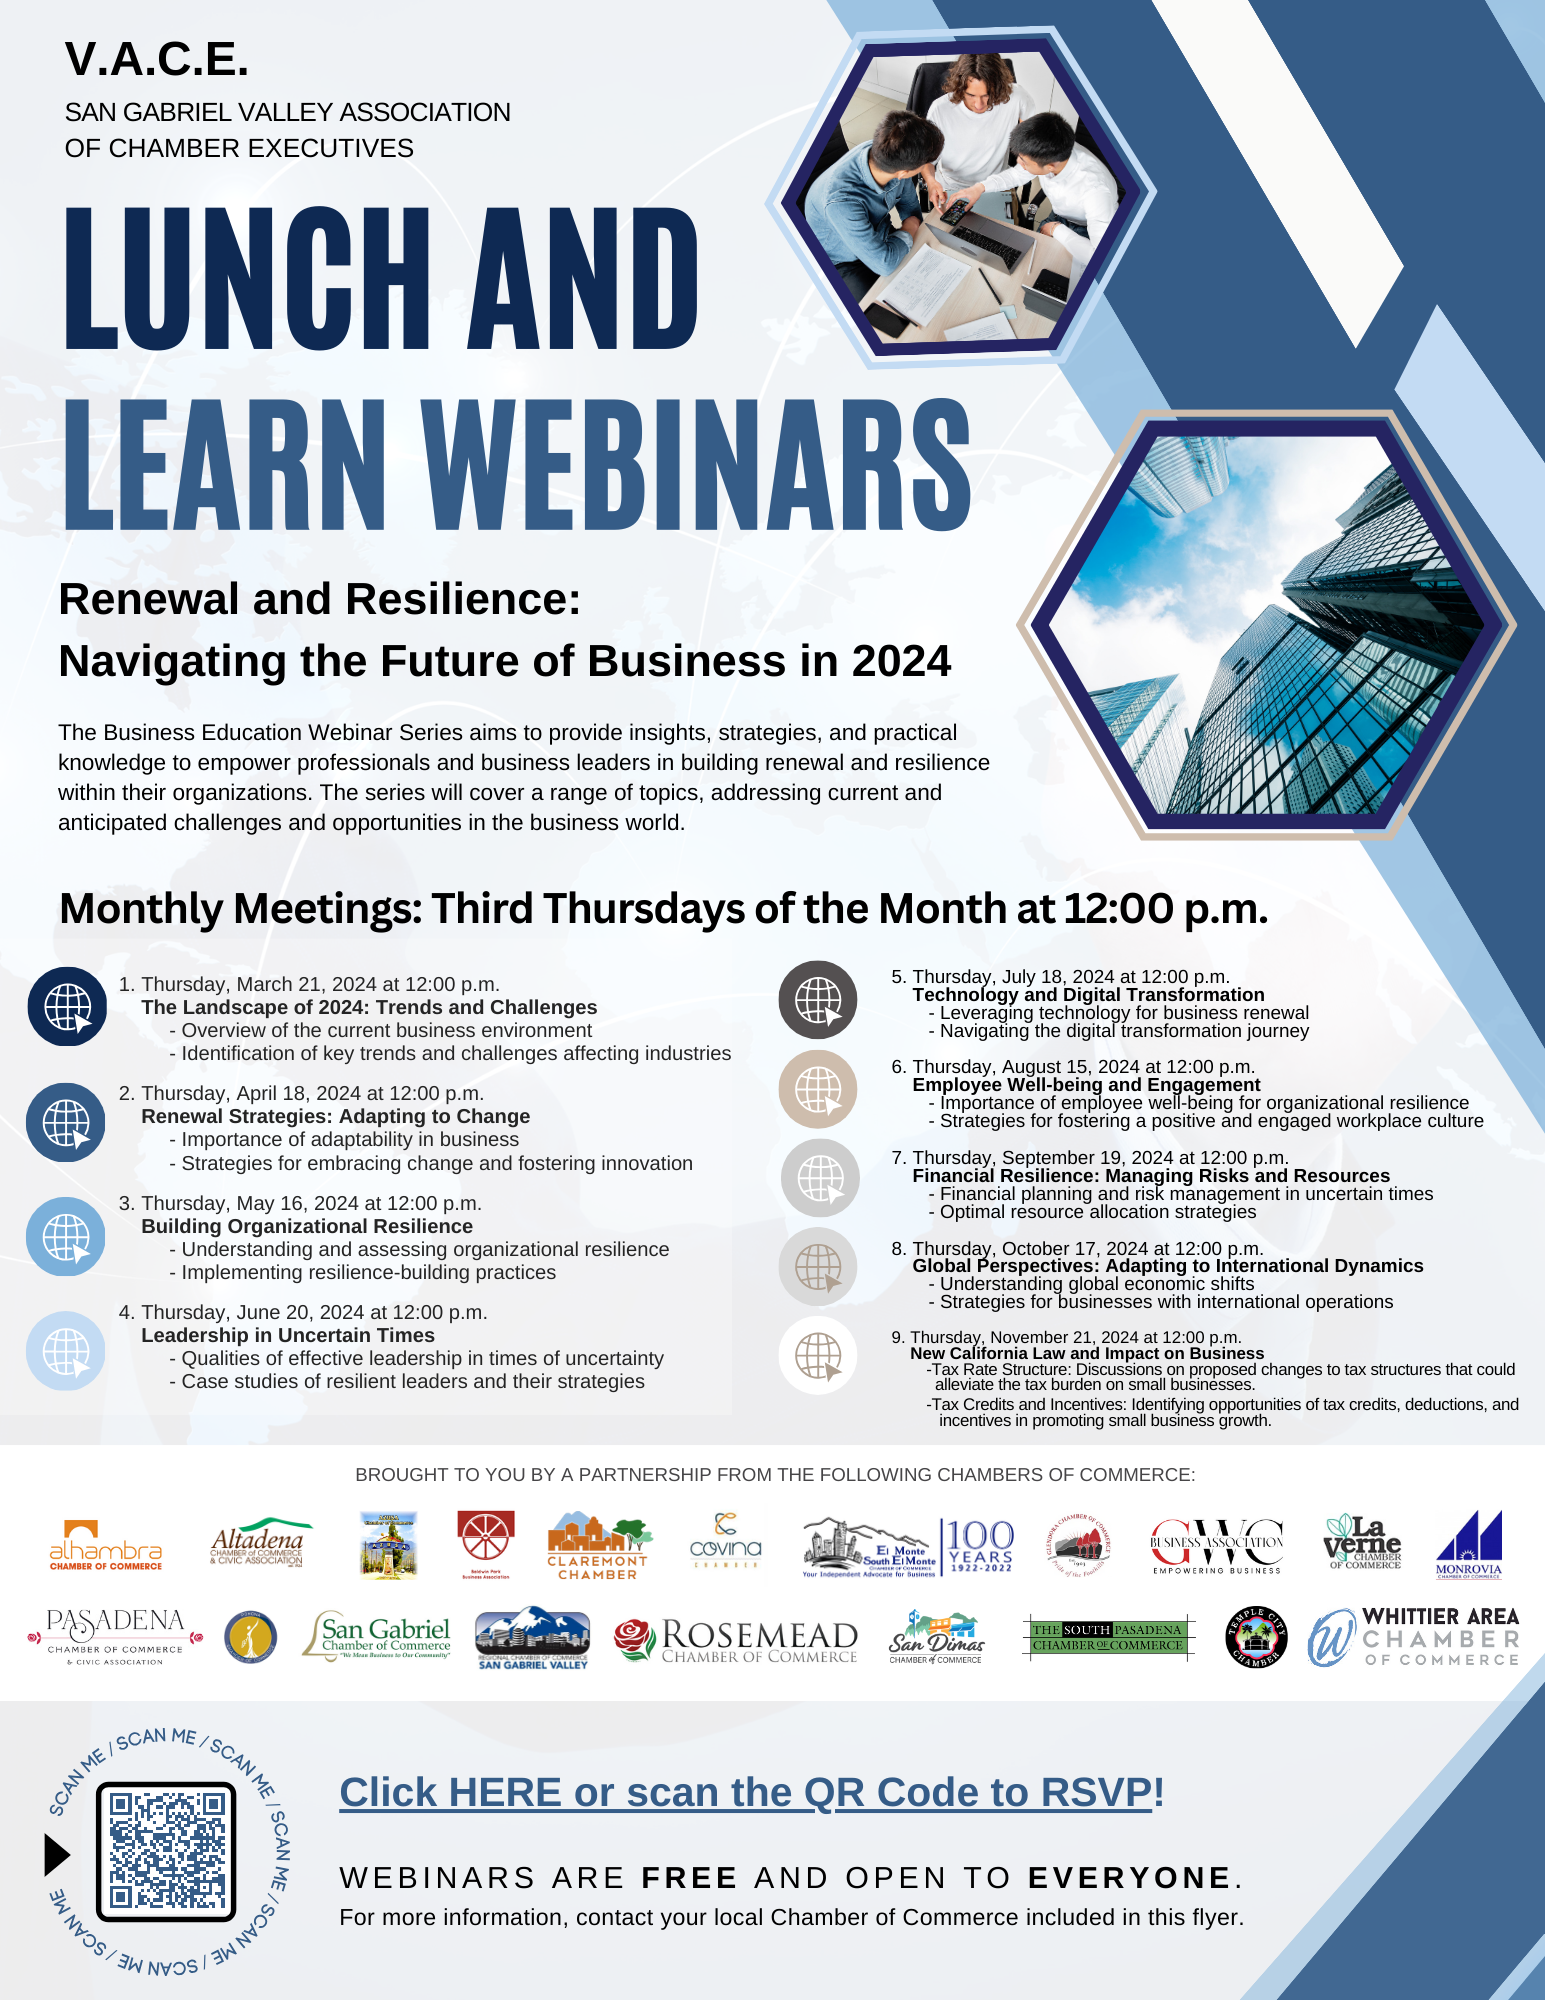 VACE Lunch and Learn webinar series flyer